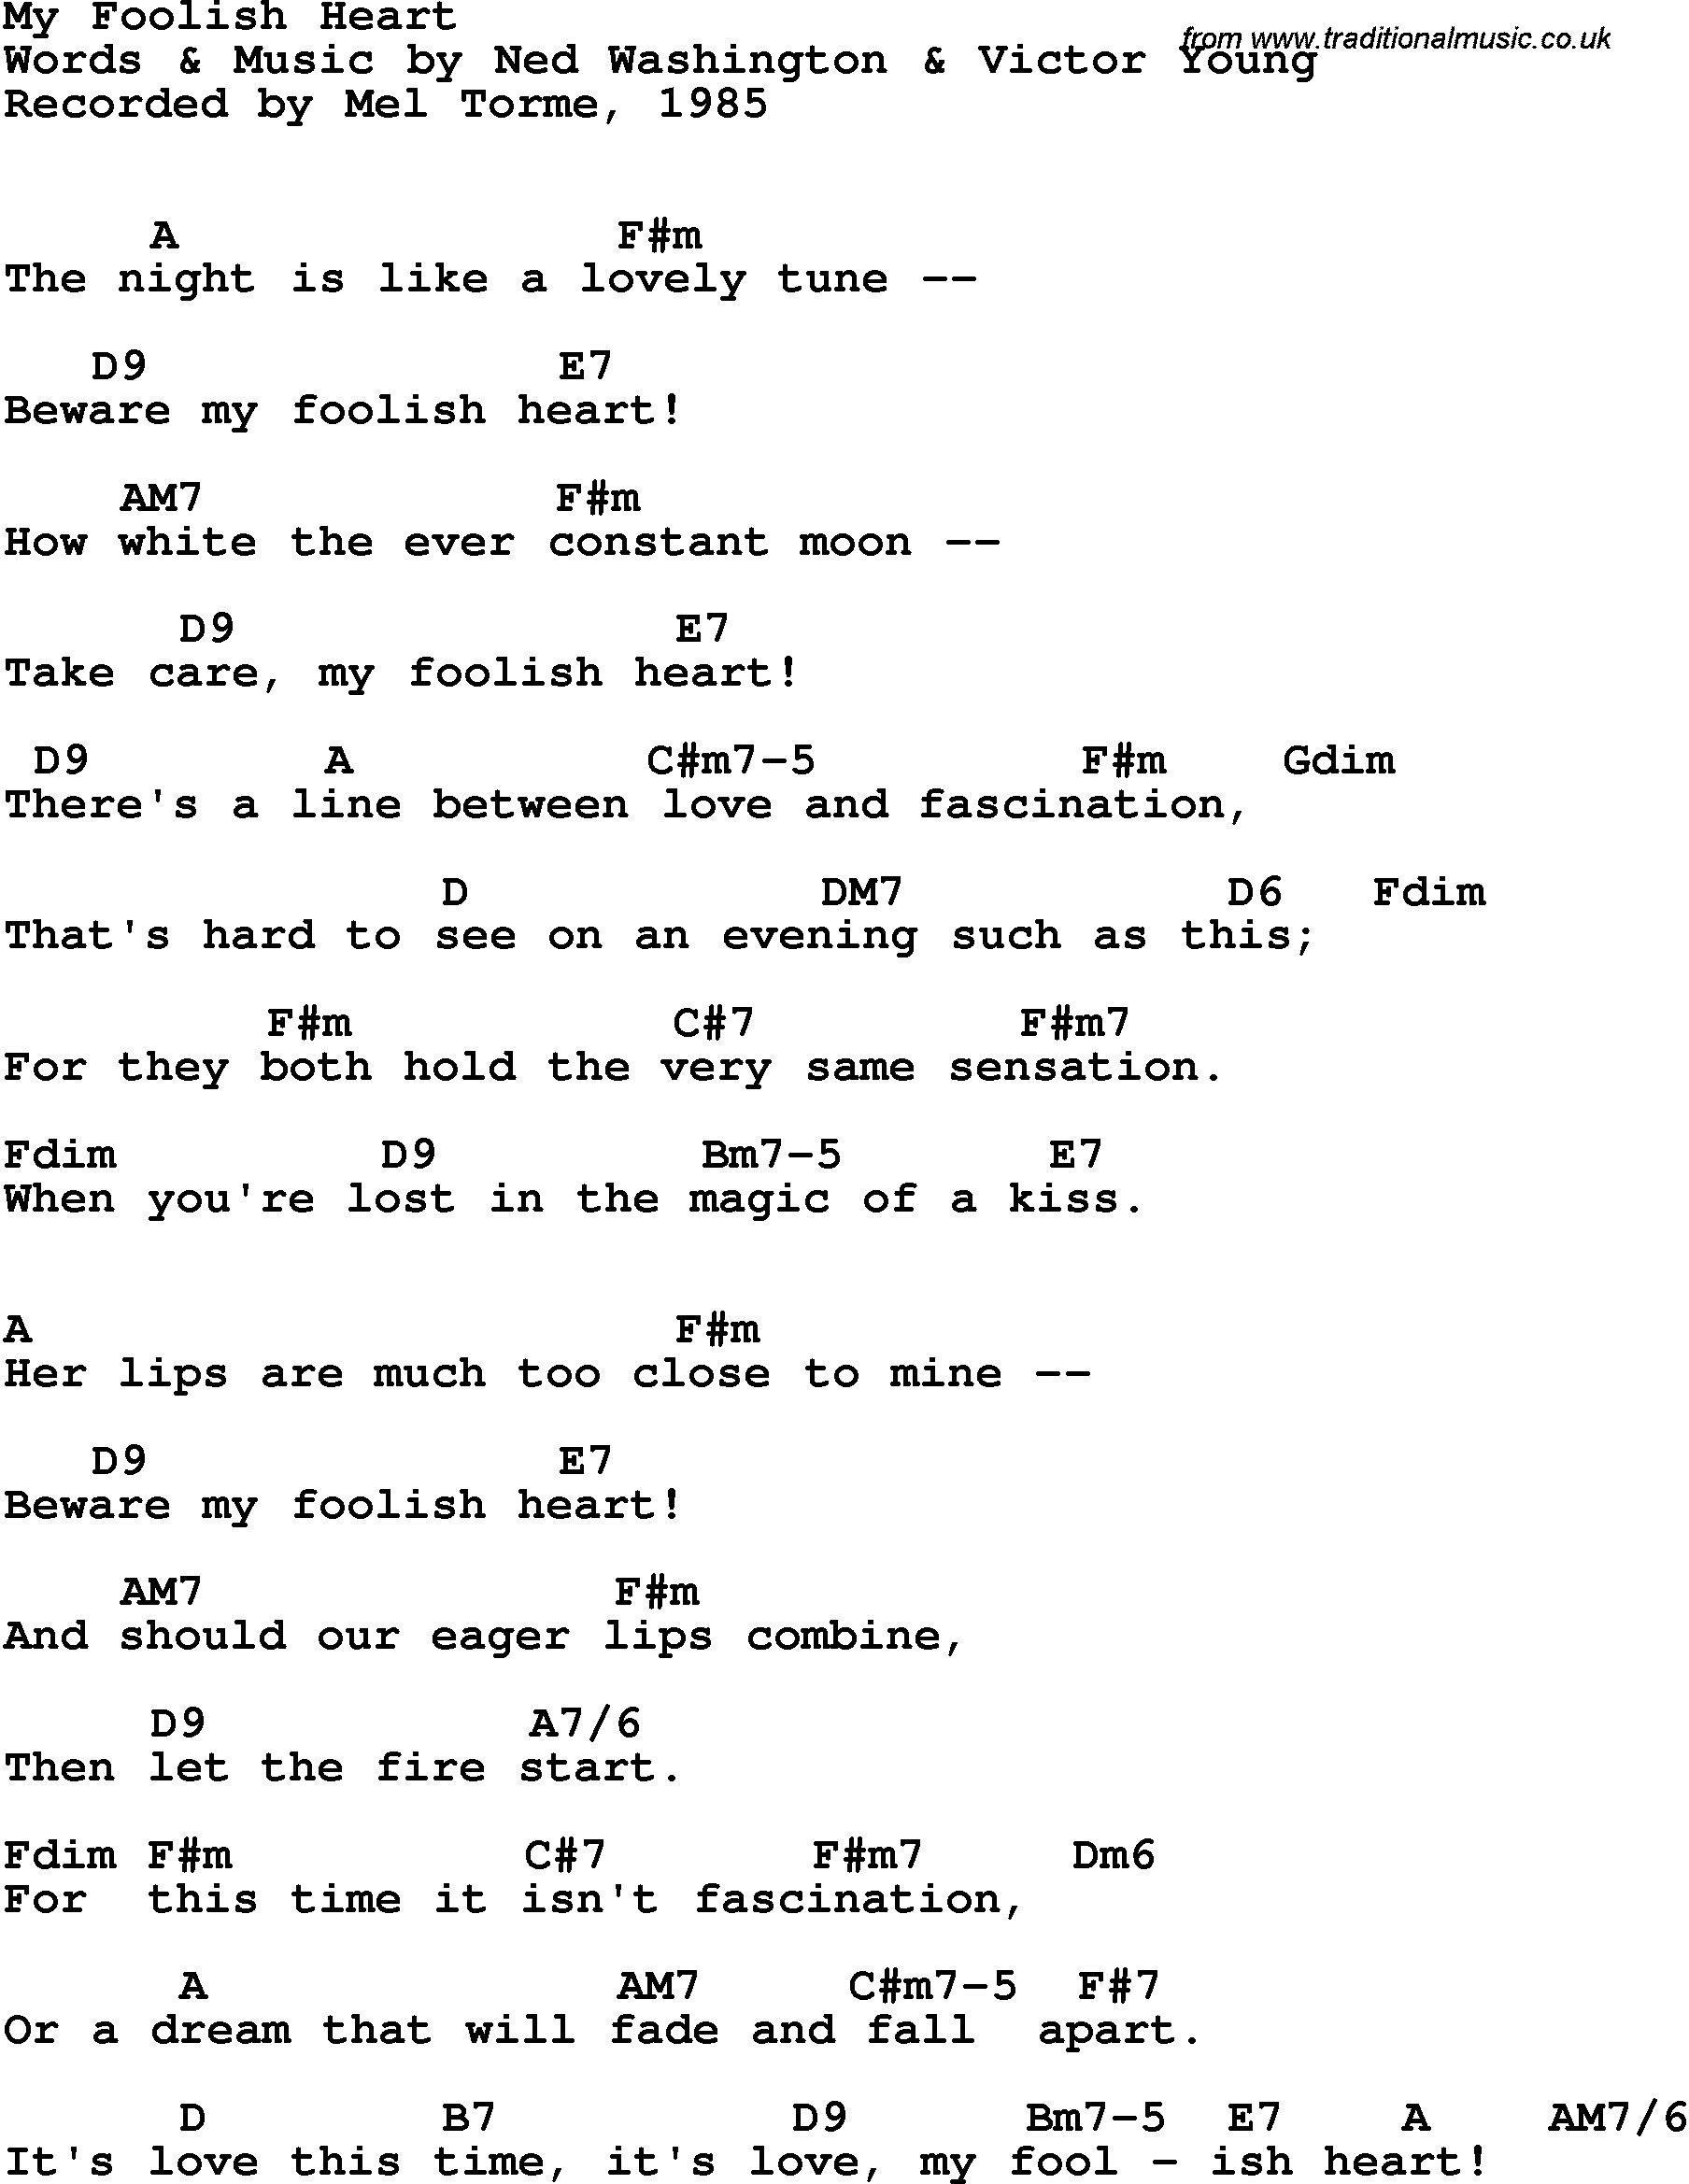 Song Lyrics with guitar chords for My Foolish Heart - Mel Torme, 1985